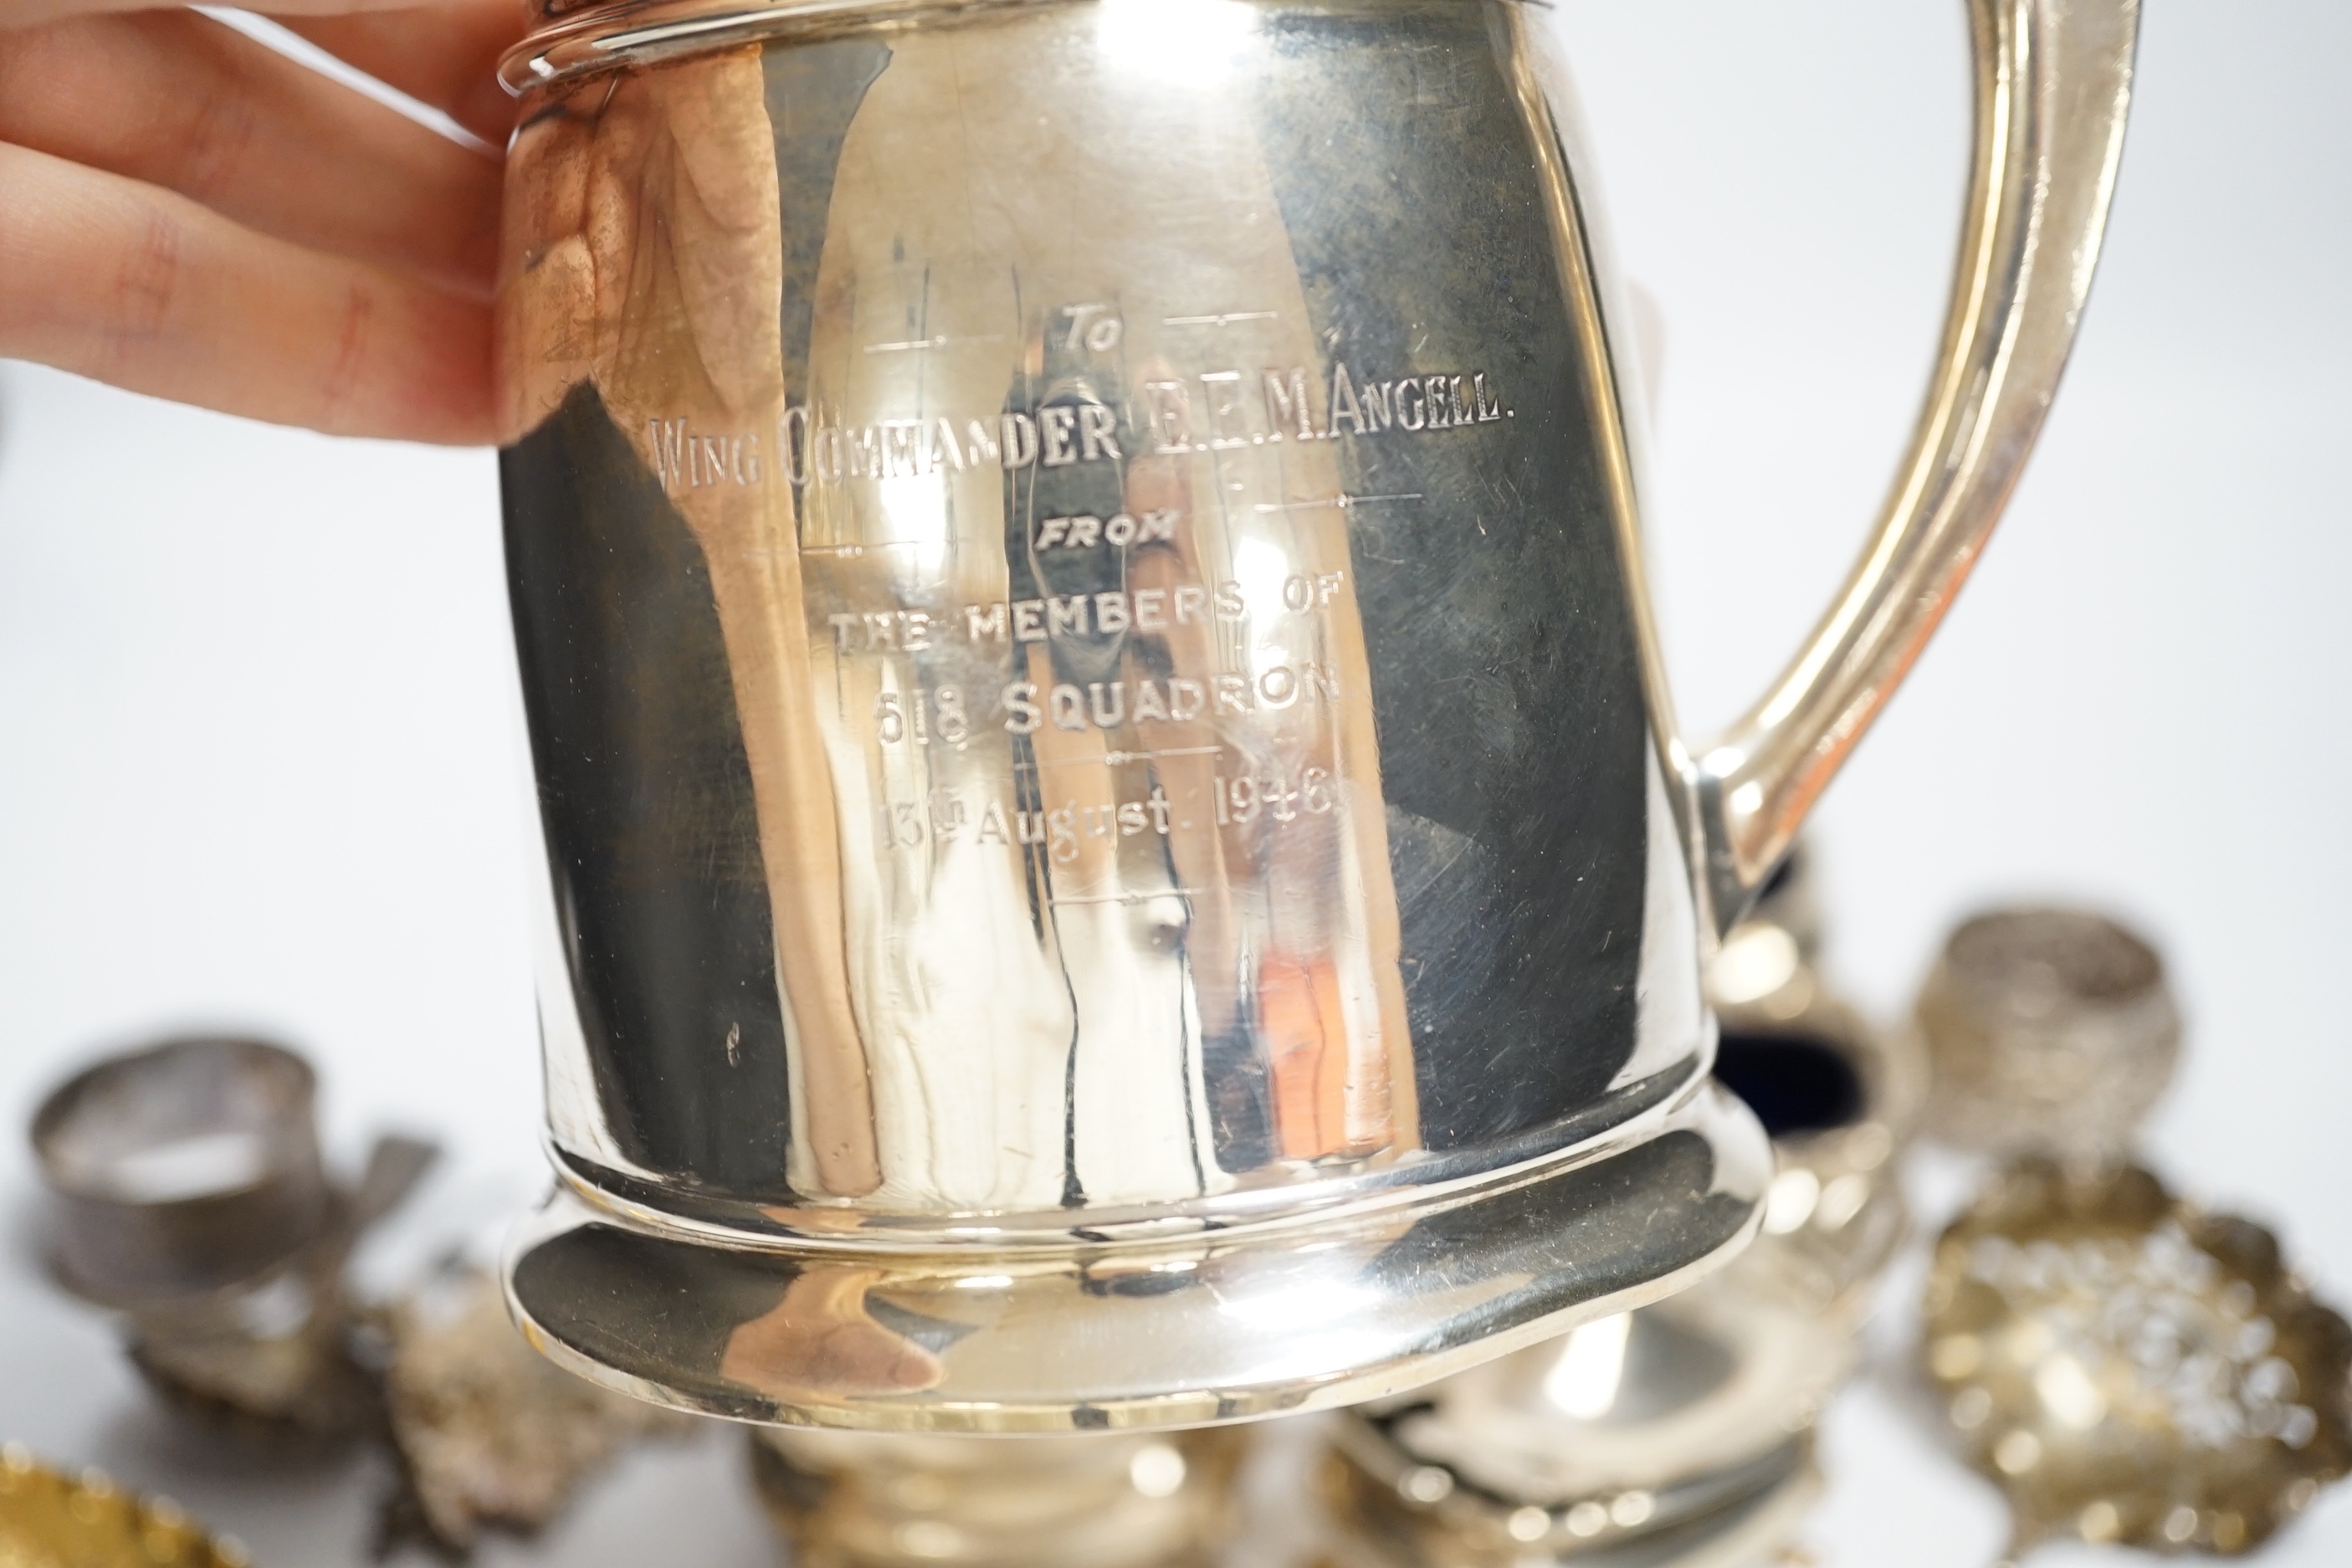 A George VI silver mug, Birmingham, 1937, 11.5cm with engraved inscription to Wing Commander E.E.M Angell, a pair of George III Old English pattern berry spoons, a George IV silver caddy spoons and other items including